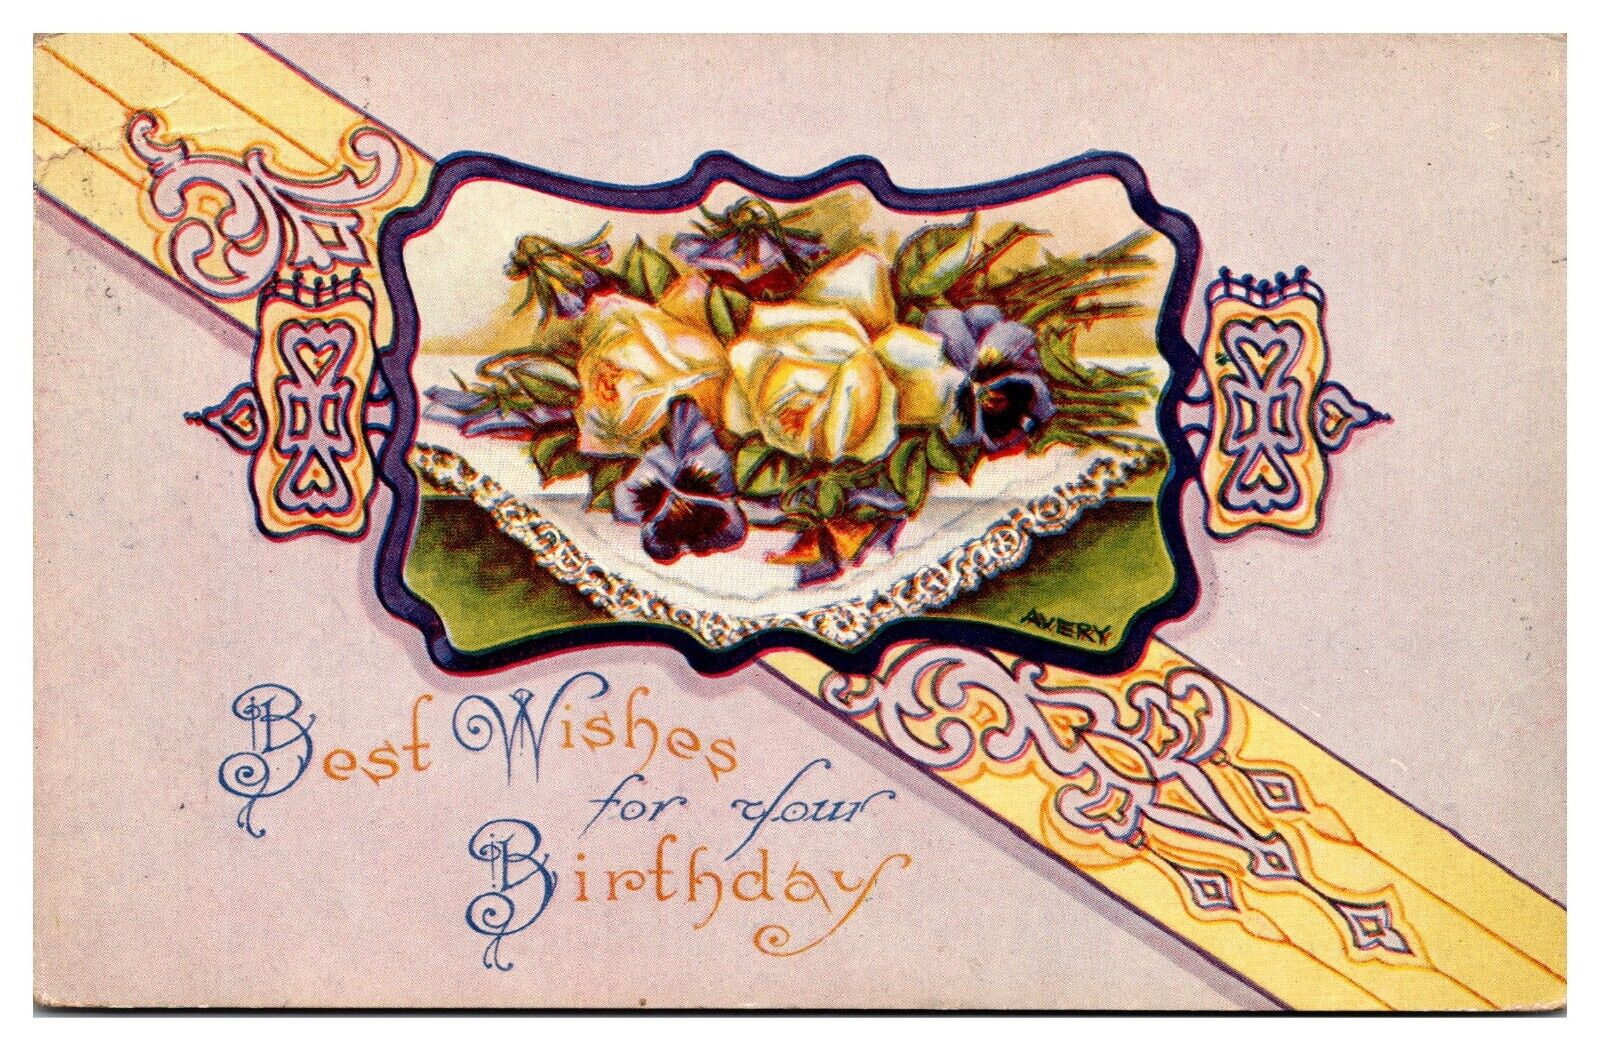 1913 Best Wishes for your Birthday, Floral, Embossed, Greetings Postcard